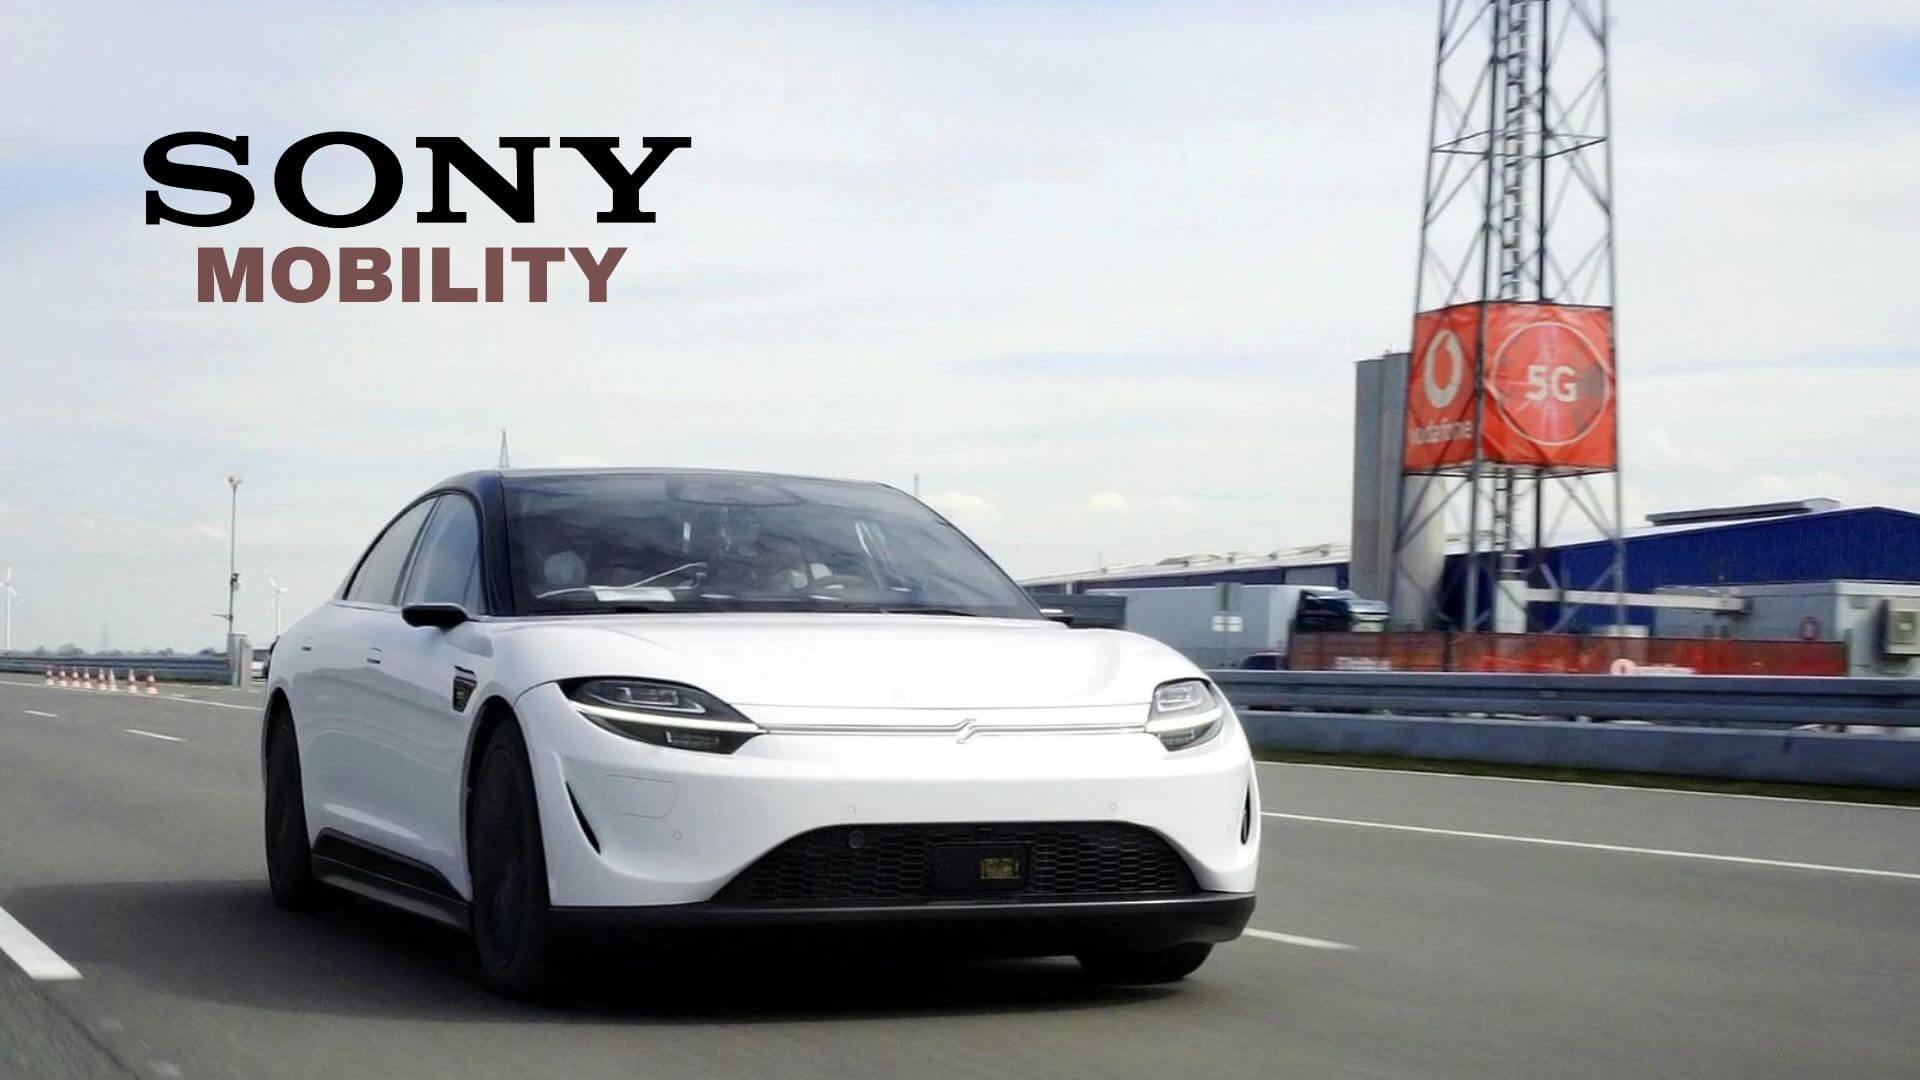 https://e-vehicleinfo.com/sony-mobility-electric-car-s-vision-02/